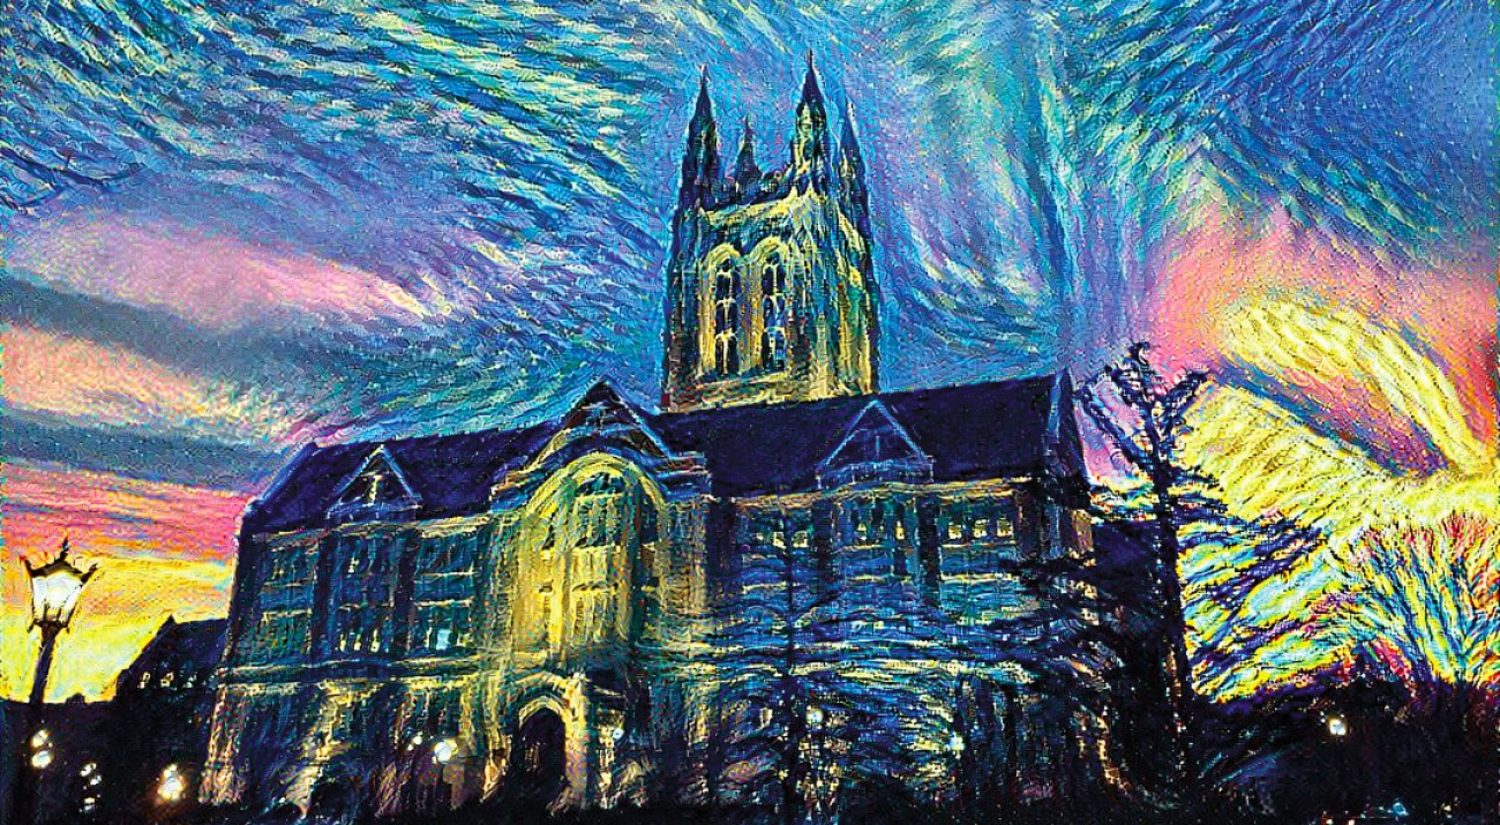 Gasson Hall, in the style of Vincent van Gogh